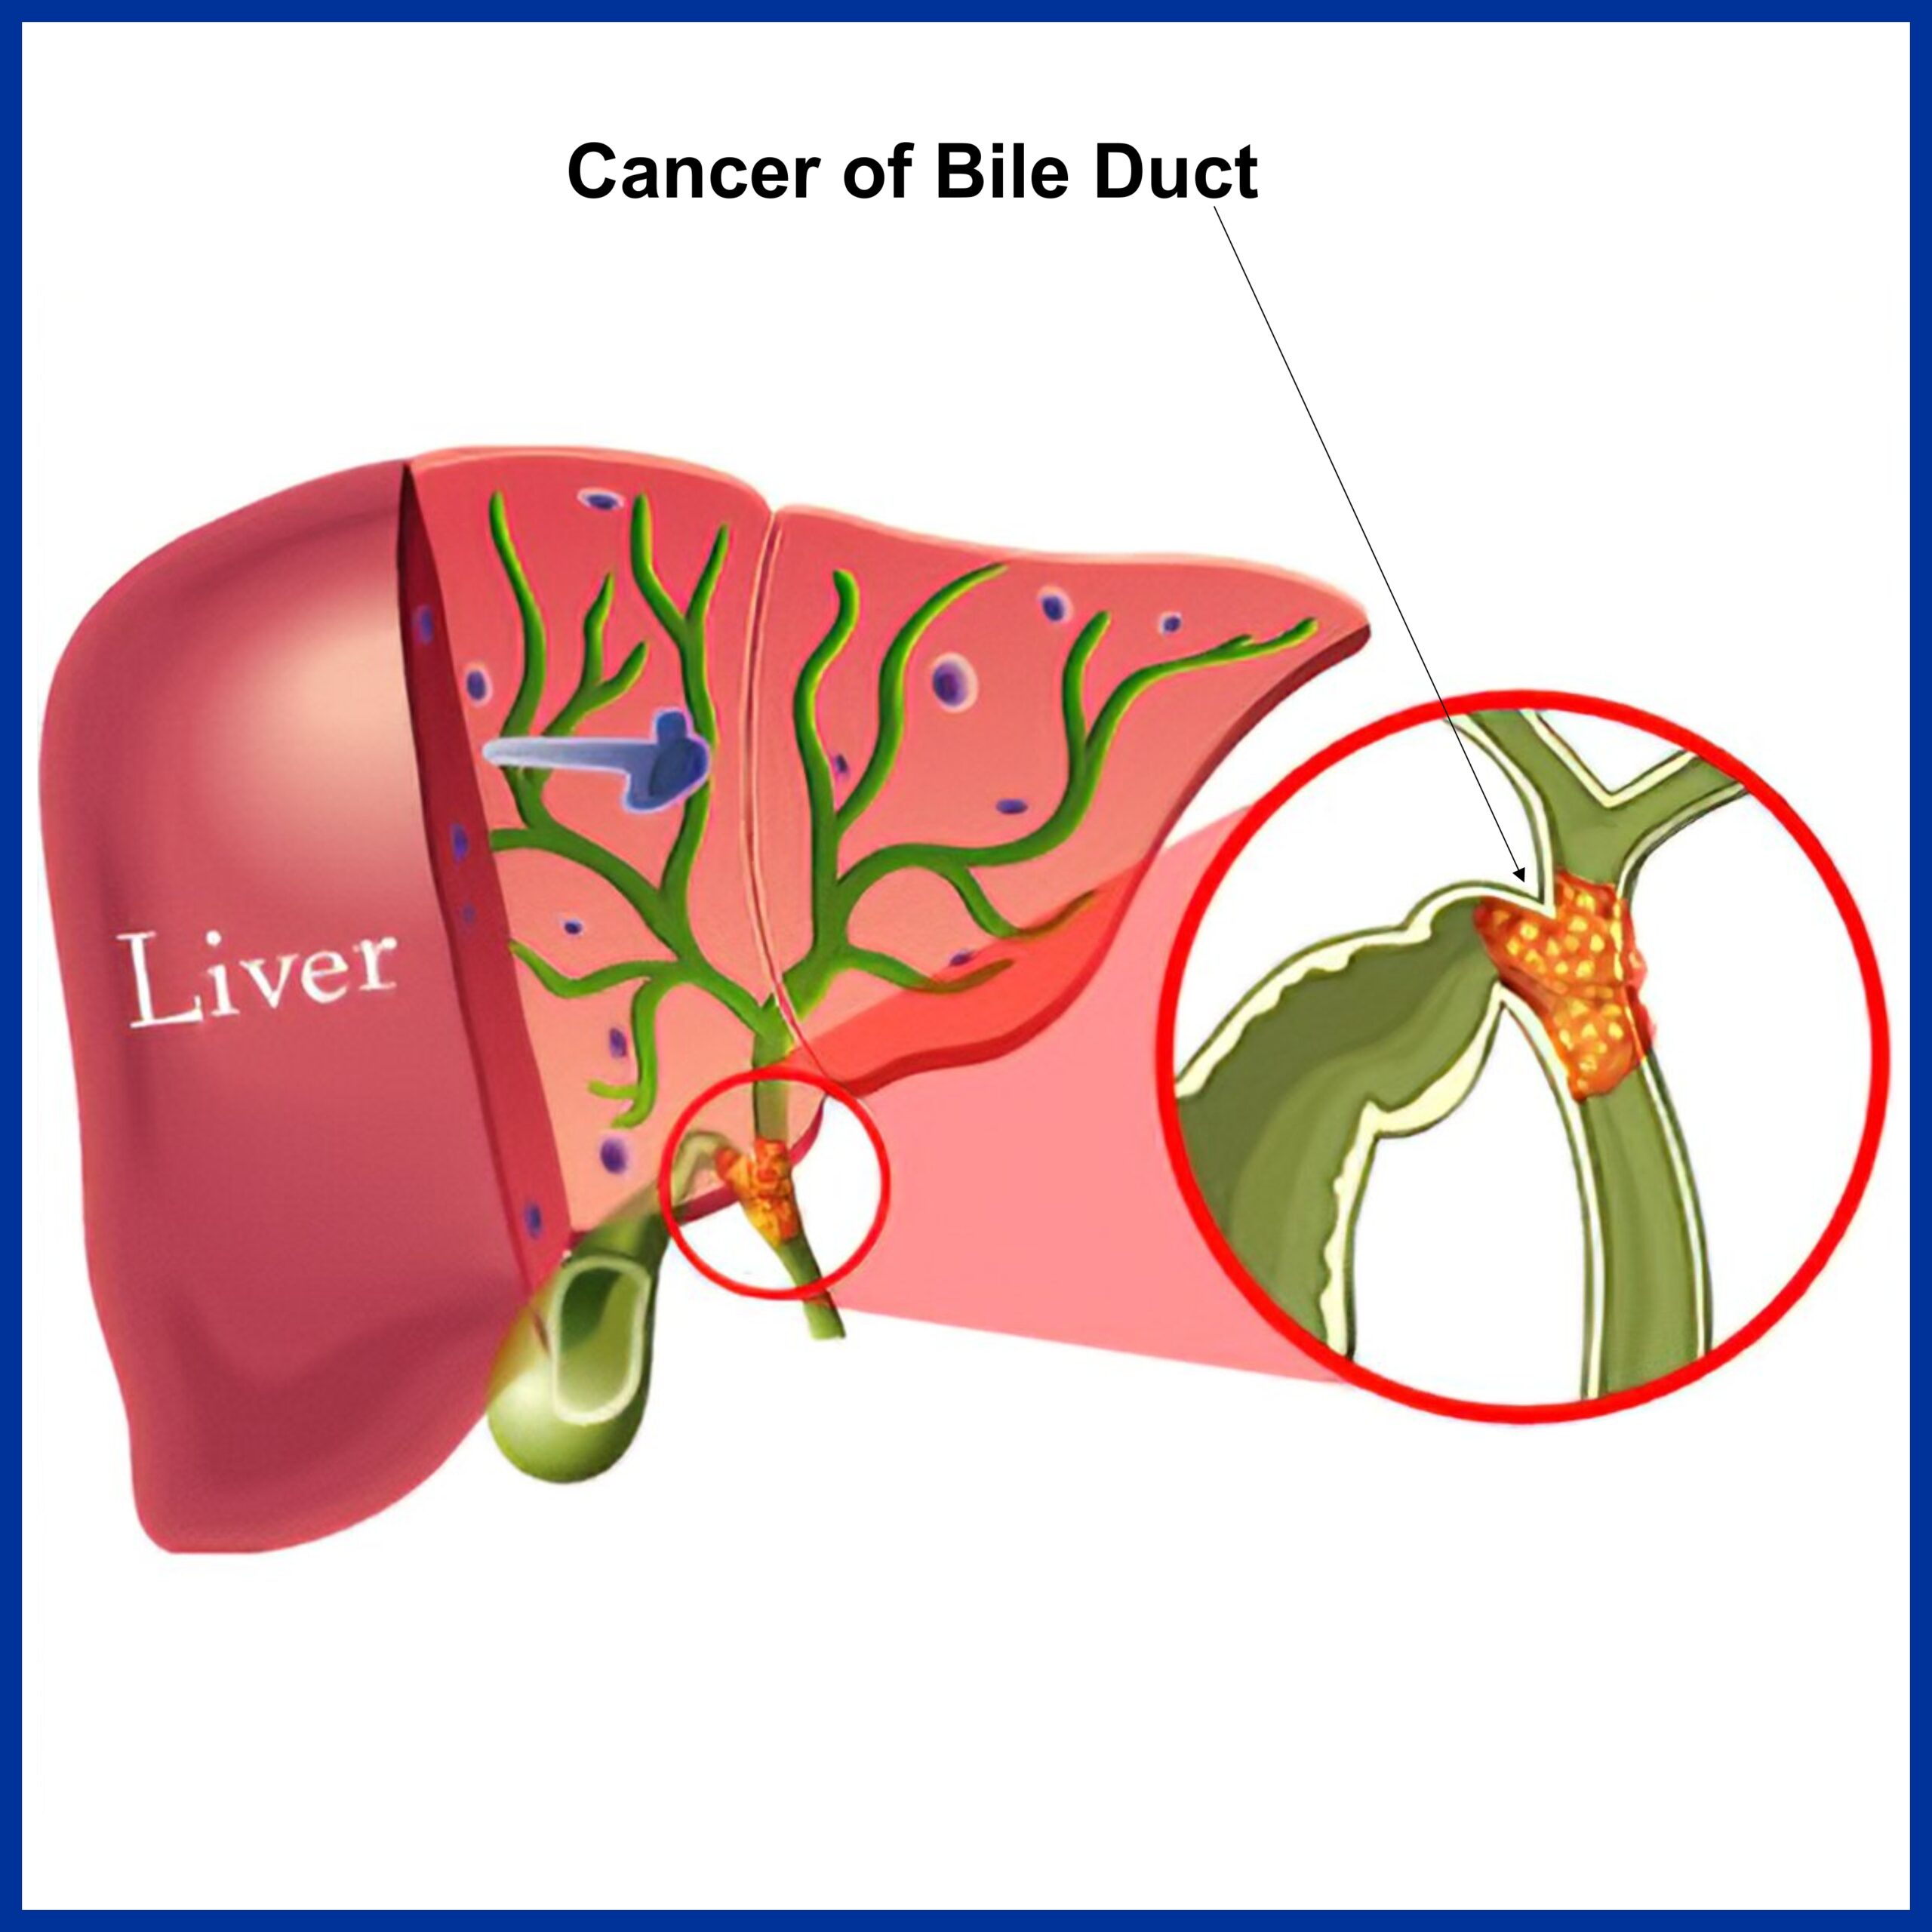 Cancer of Bile Duct